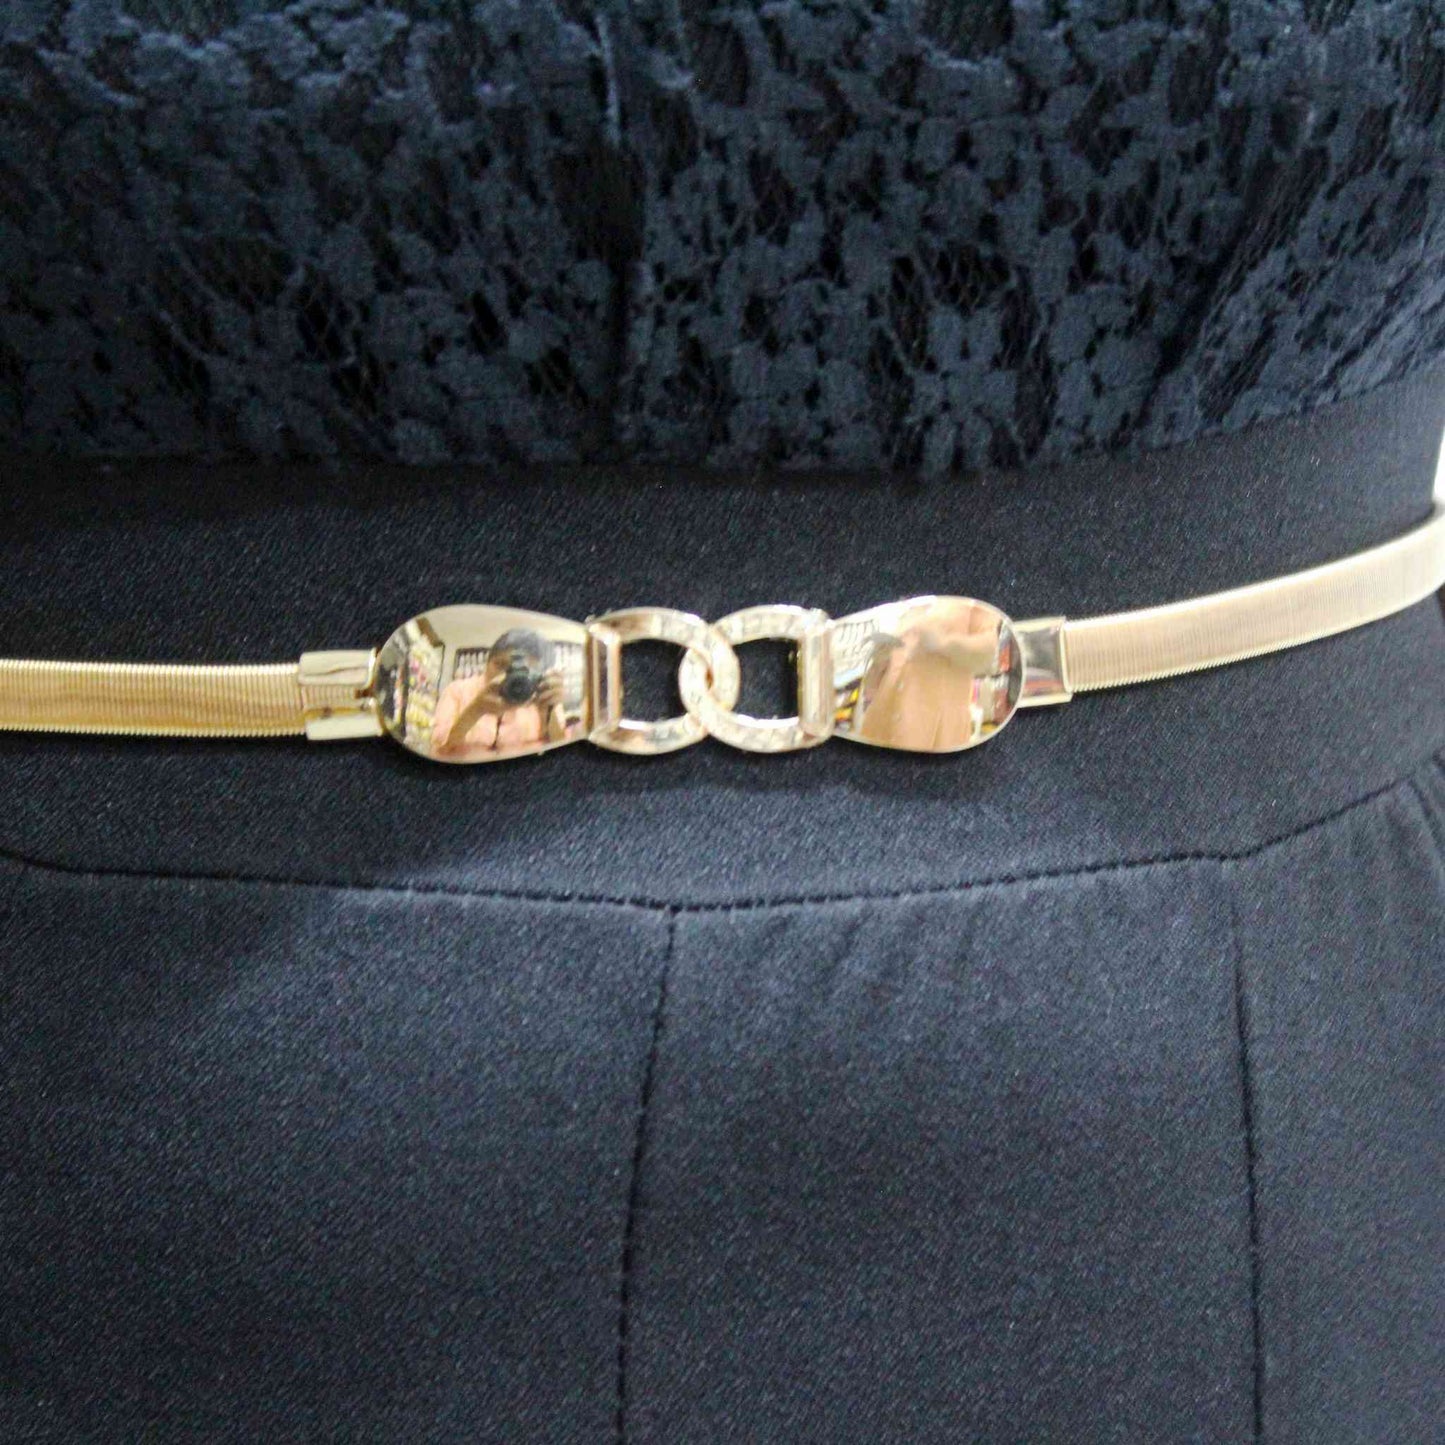 Stylish Fancy Metal Party Stretchable Spring Belt For Girls, Women, Gold